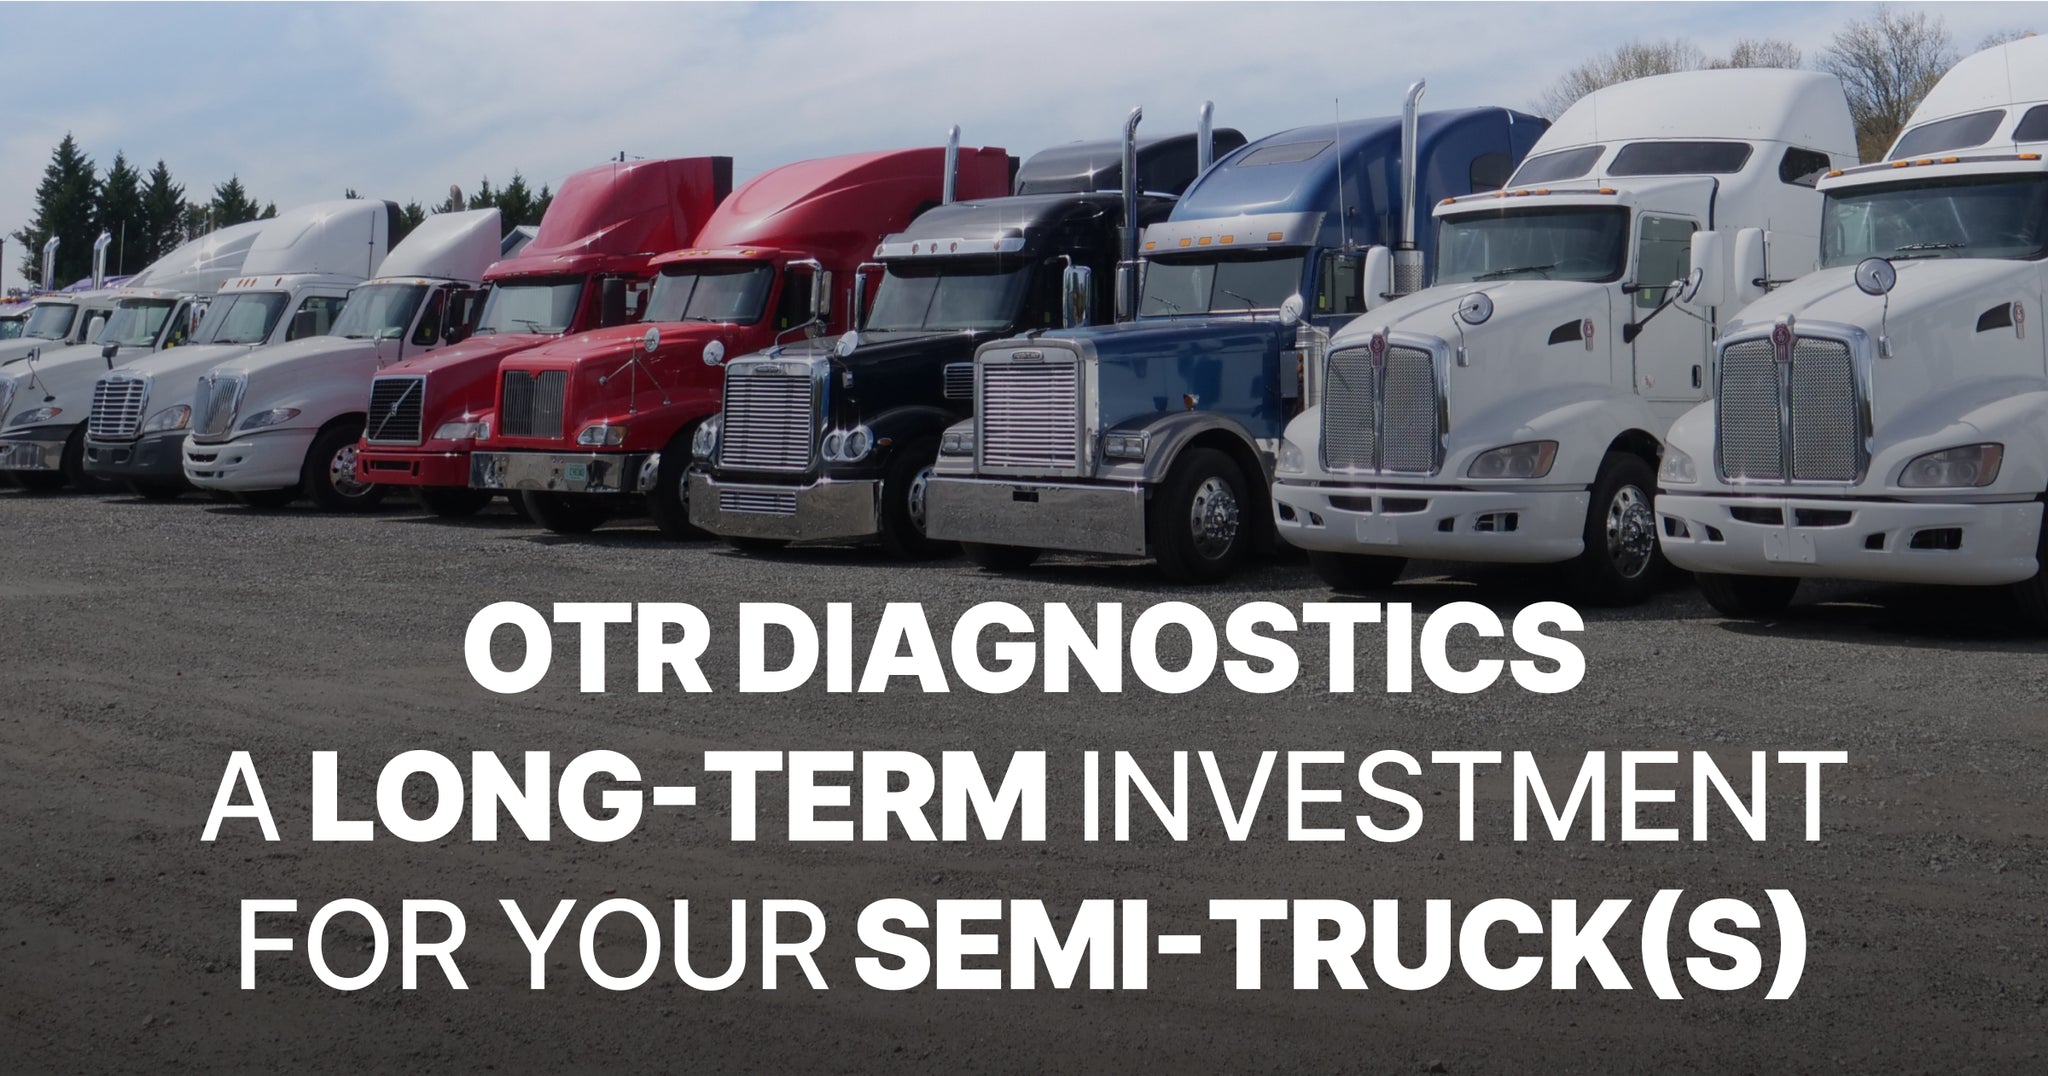 Why OTR Diagnostics is a Long-Term Investment for Your Semi-Truck(s)